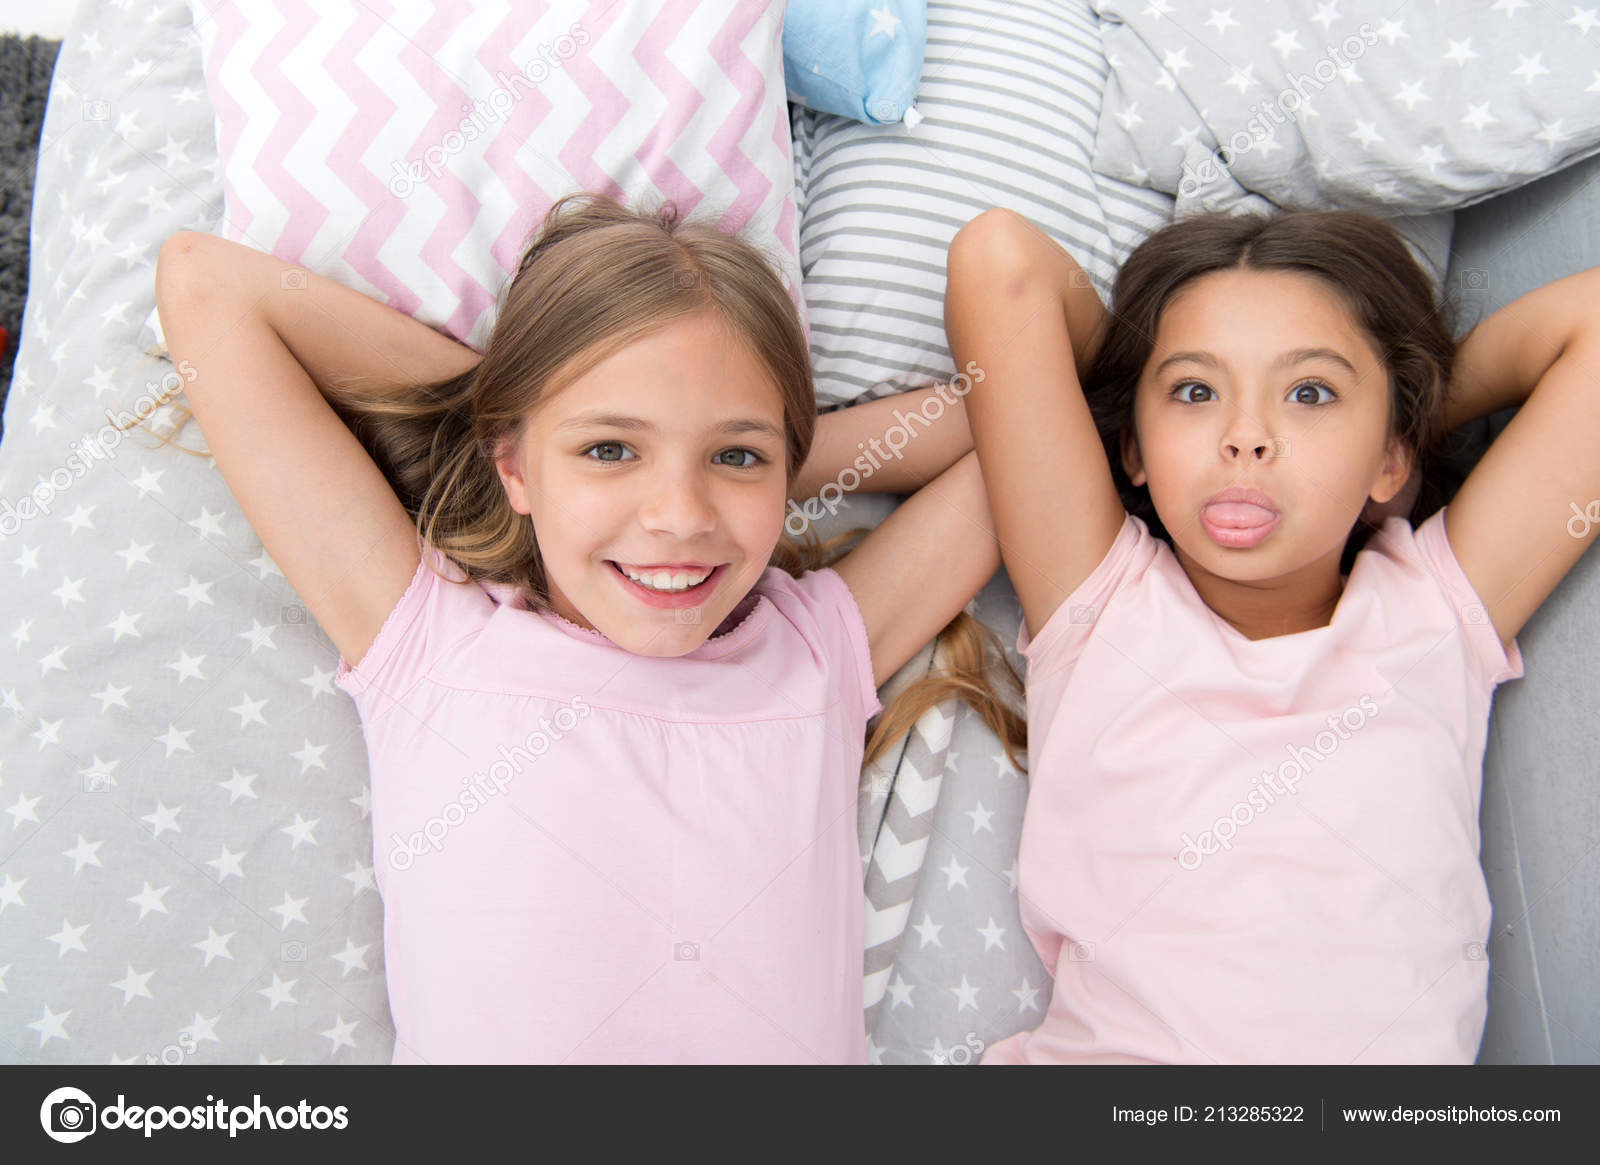 Best Friends Forever Girls Children Lay On Bed With Cute Pillows Top View Pajamas Party Concept Girls In Playful Mood With Grimace Face Friends Children Having Fun Together And Feel Comfortable Royalty